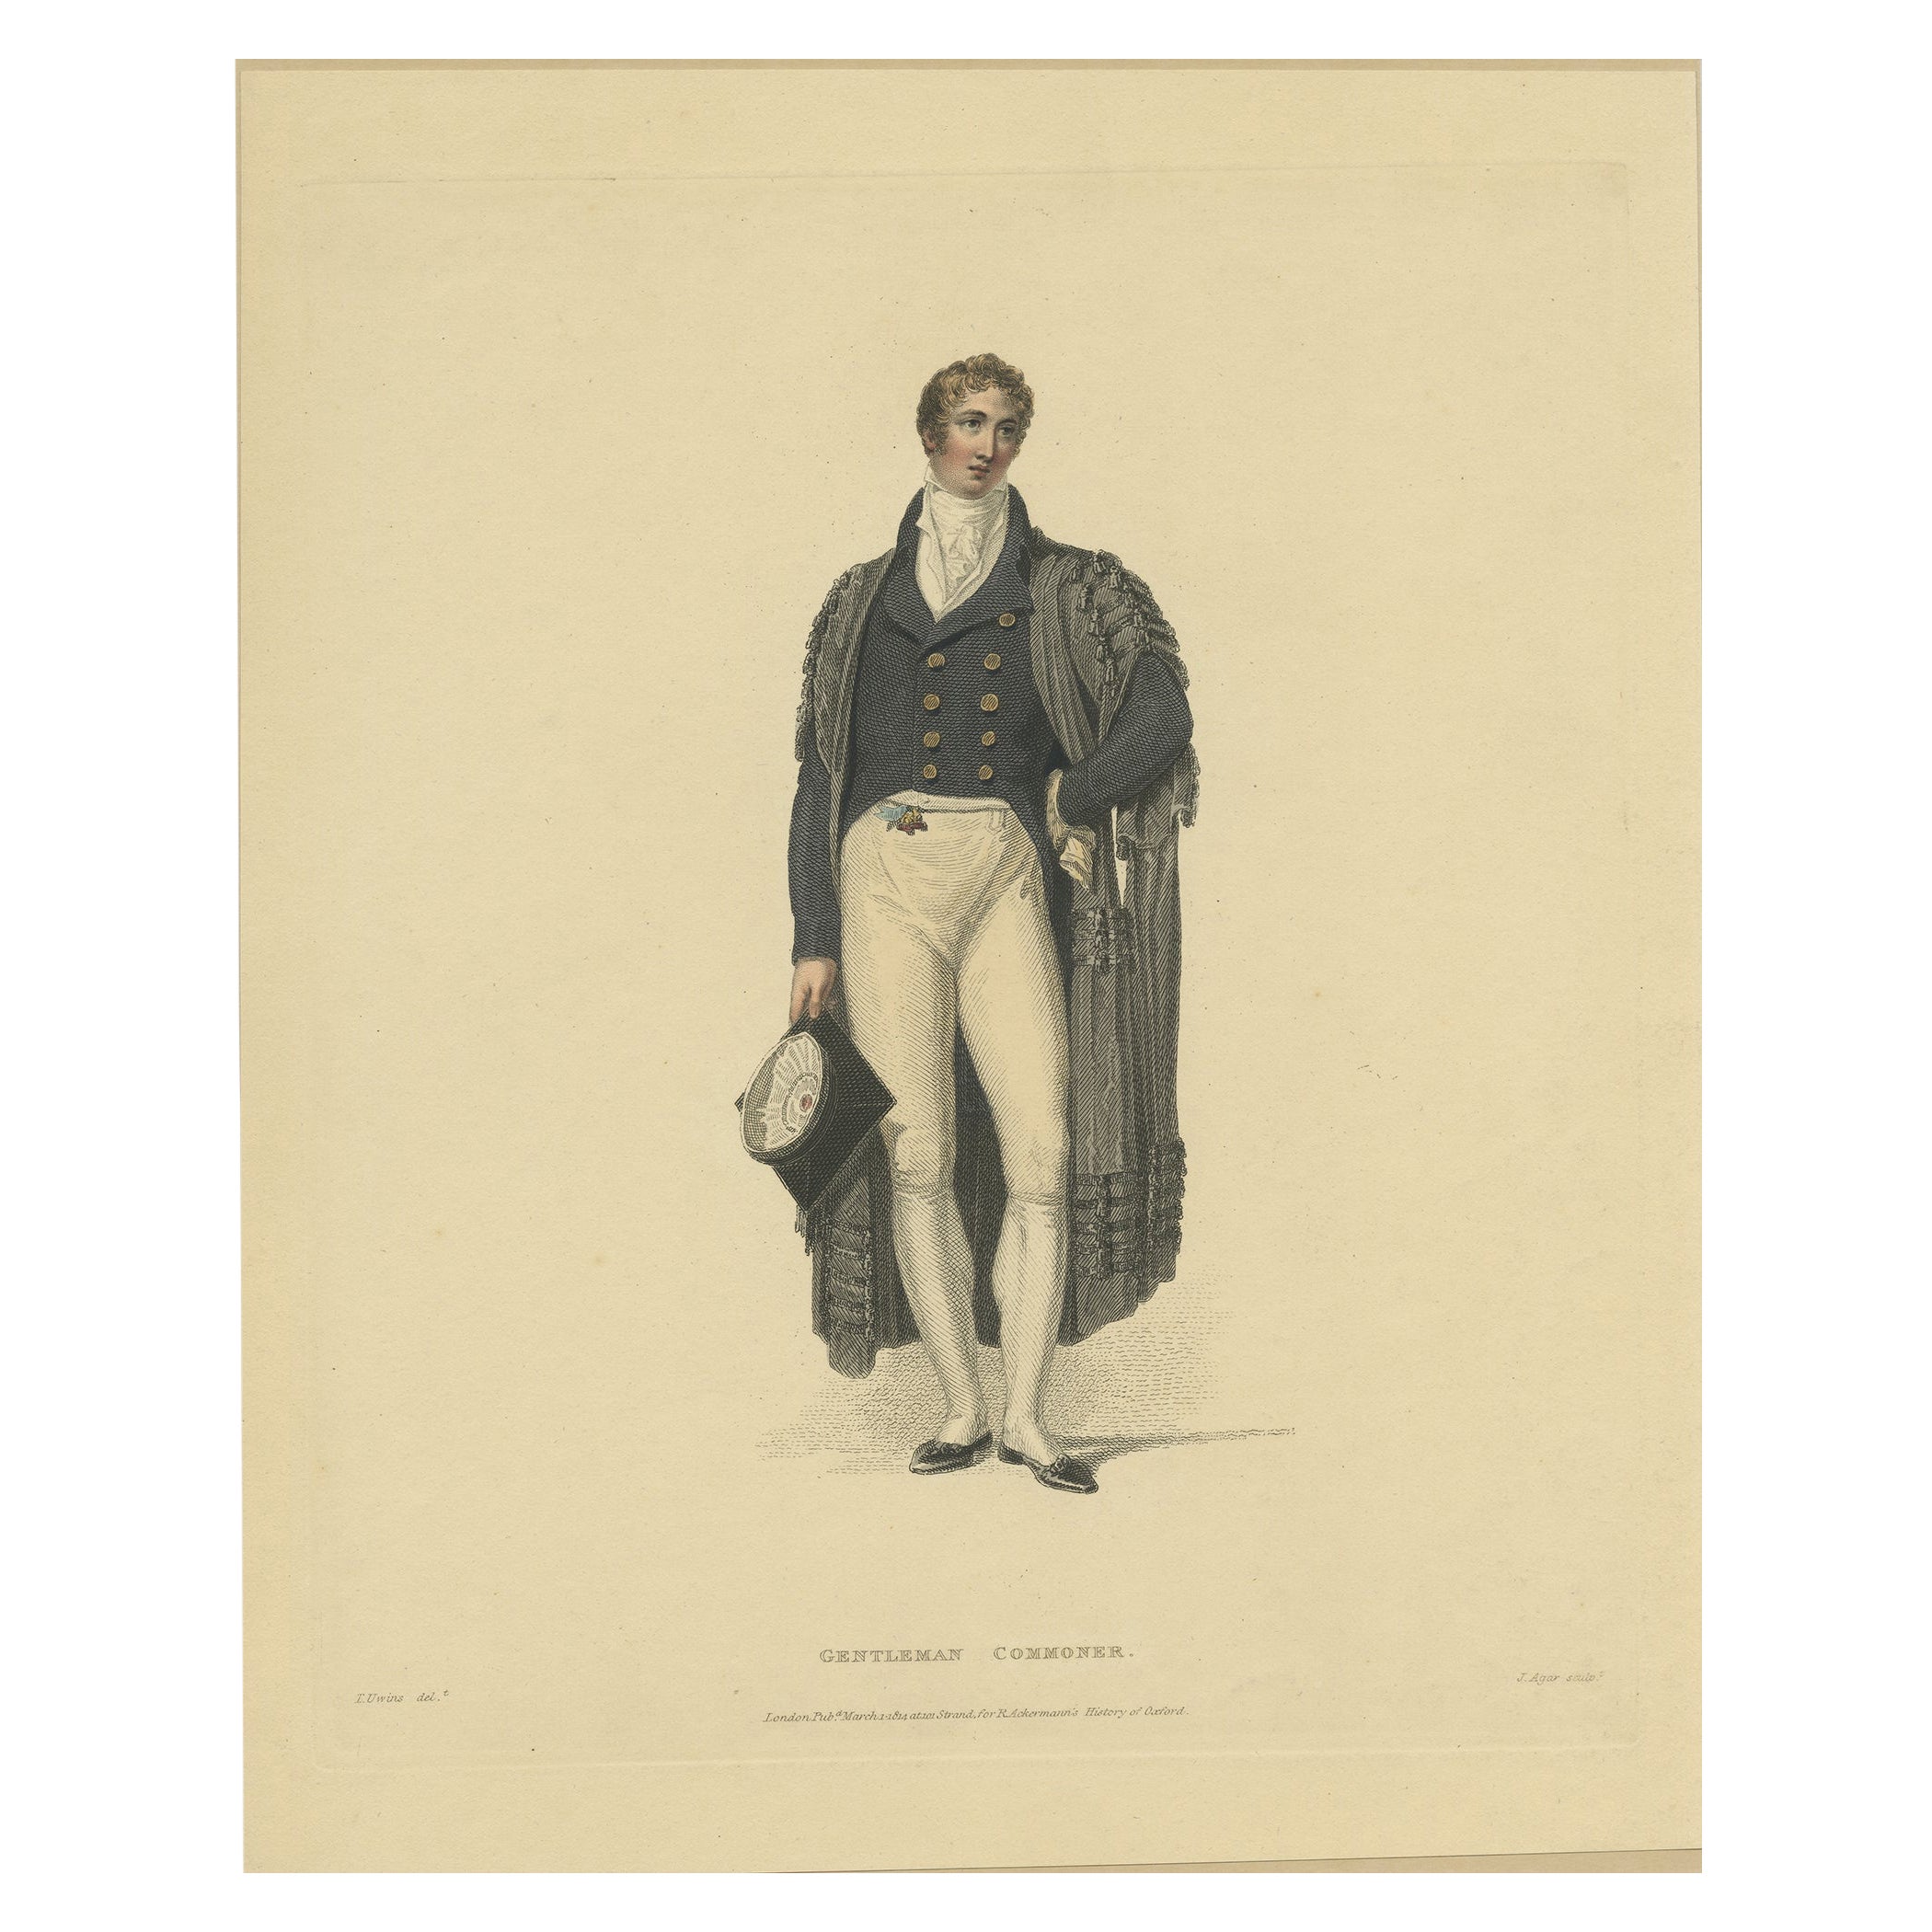 Antique Print of a Gentleman-Commoner From History of Oxford and Cambridge, 1814 For Sale